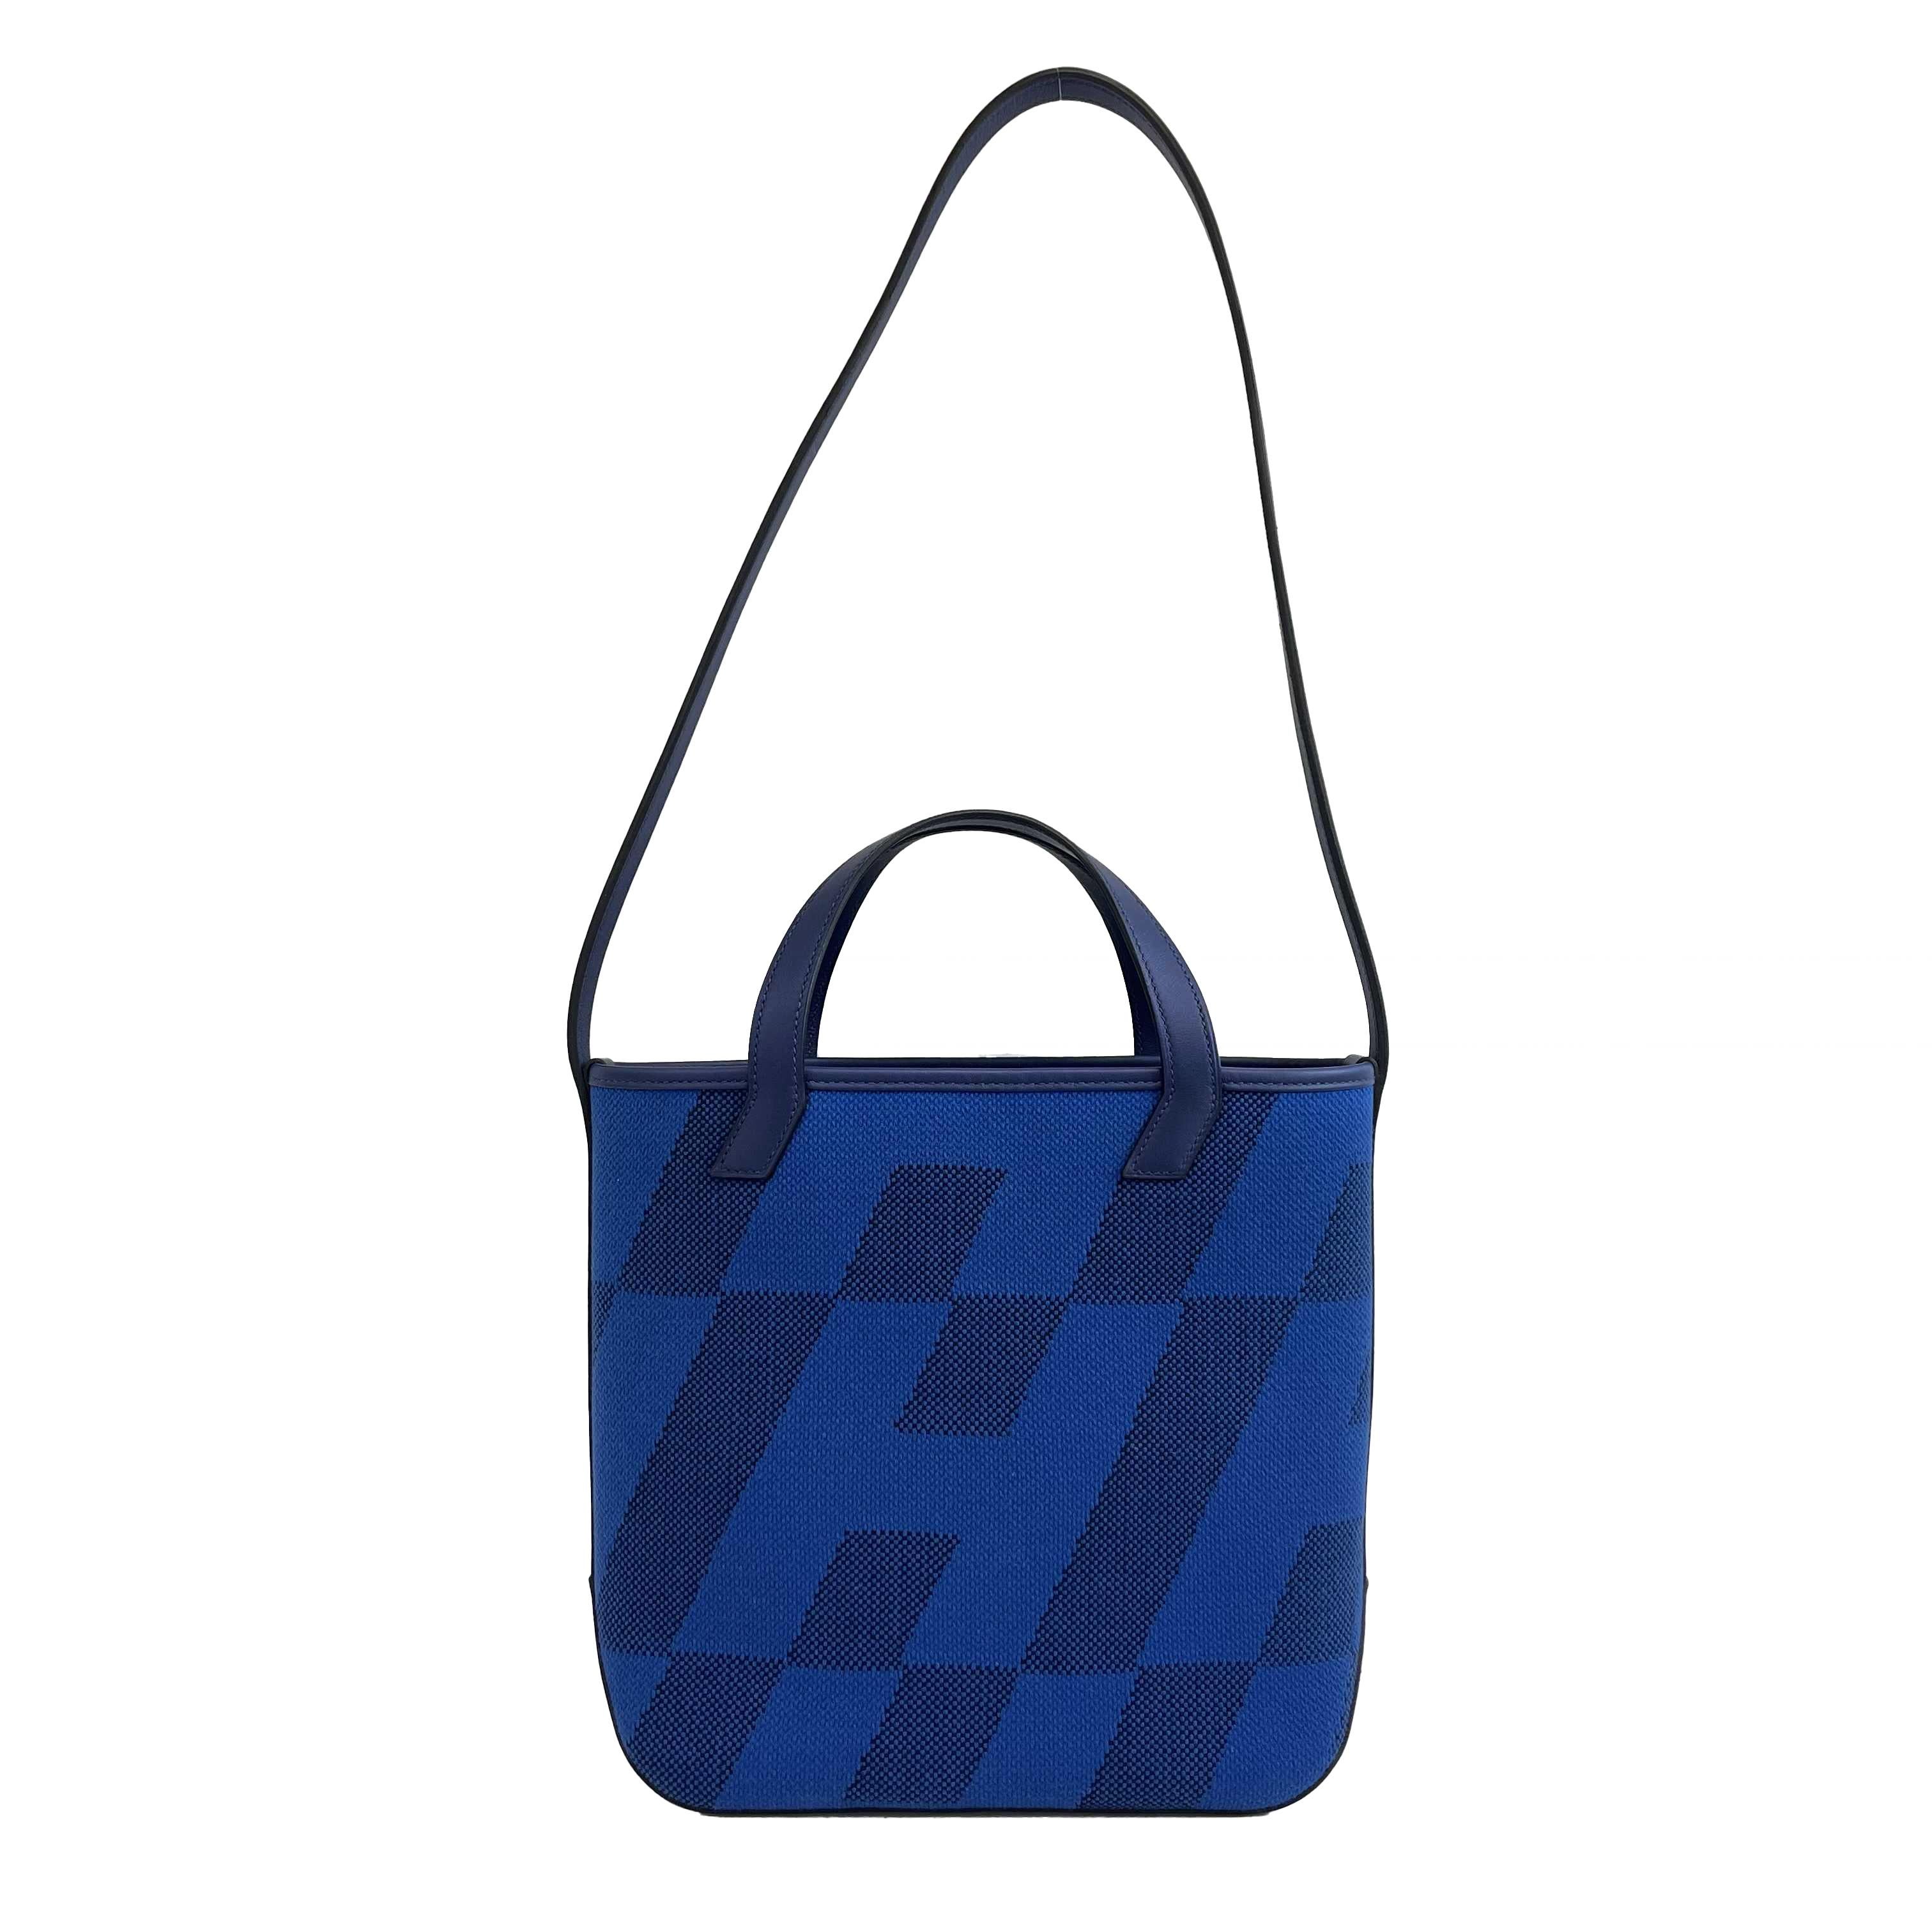 Hermes - NEW Cabas H en Biais Swift Toile Canvas 27 (Blue limited edition) Tote w/ Shoulder Strap

Width: 11 in / 27.94 cm
Height: 9.5 in / 24.13 cm
Depth: 3.35 in / 8.509 cm
Strap Drop: 13.5 in / 34.29 cm
Handle Drop: 3.5 in / 8.89 cm
Details

Made